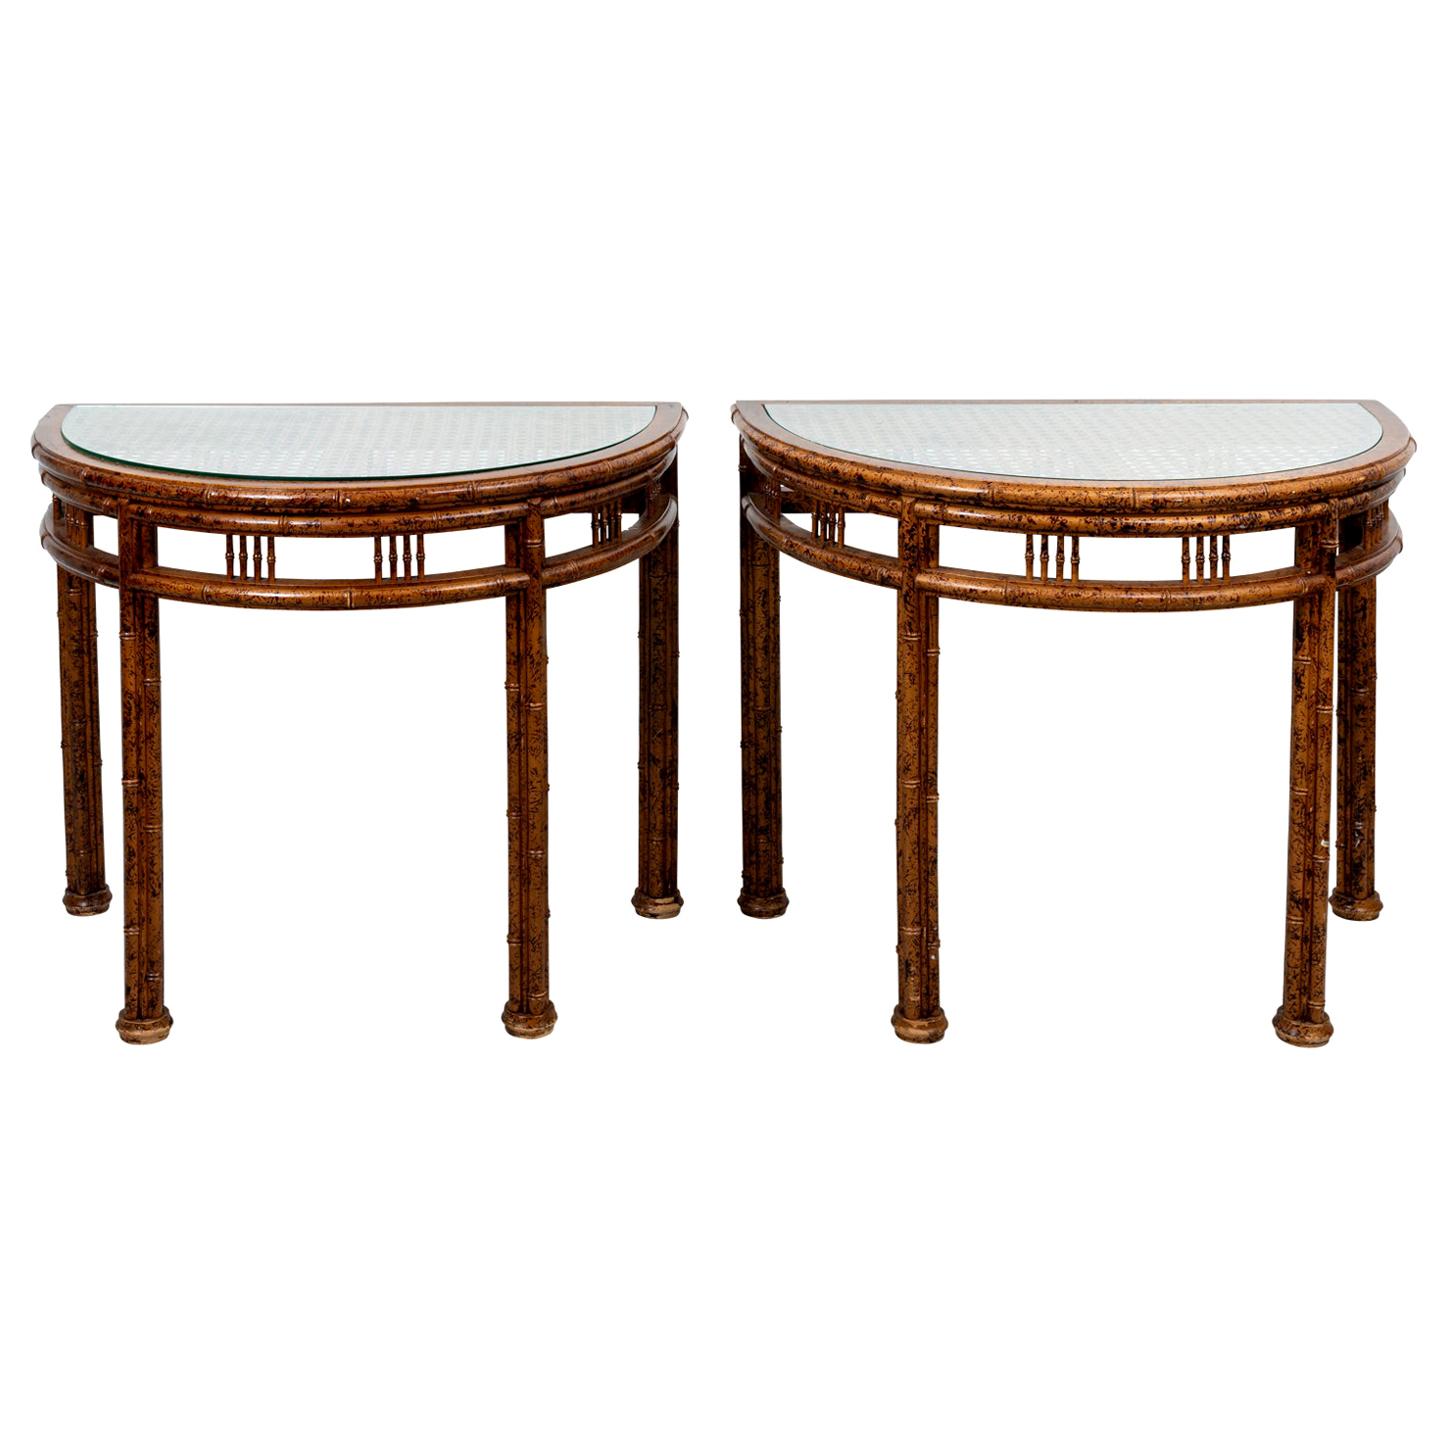 Pair of Chinese Painted Demilune Console Tables